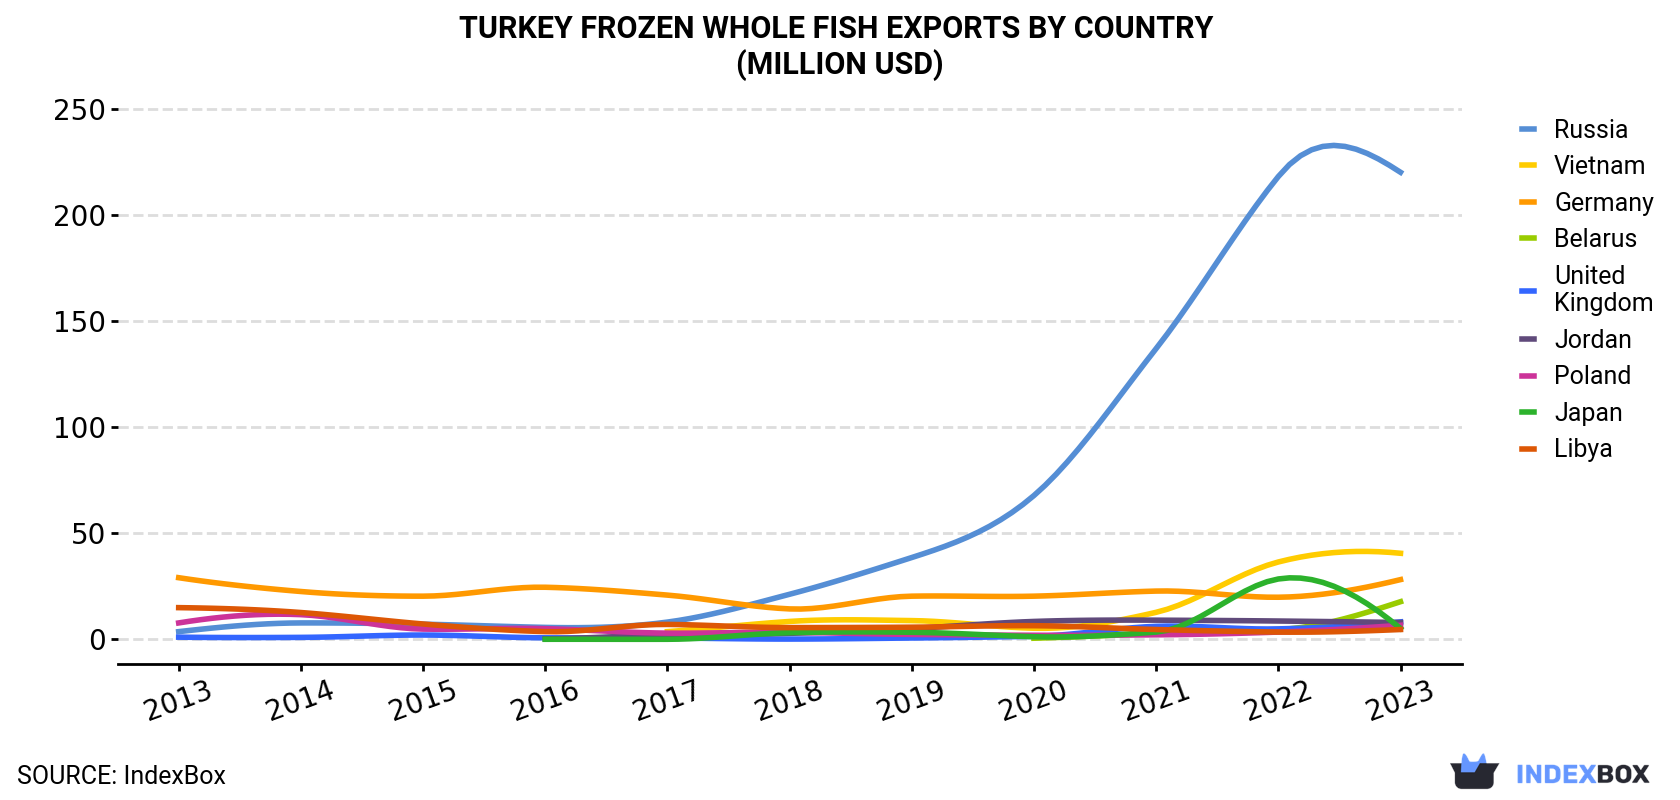 Turkey Frozen Whole Fish Exports By Country (Million USD)